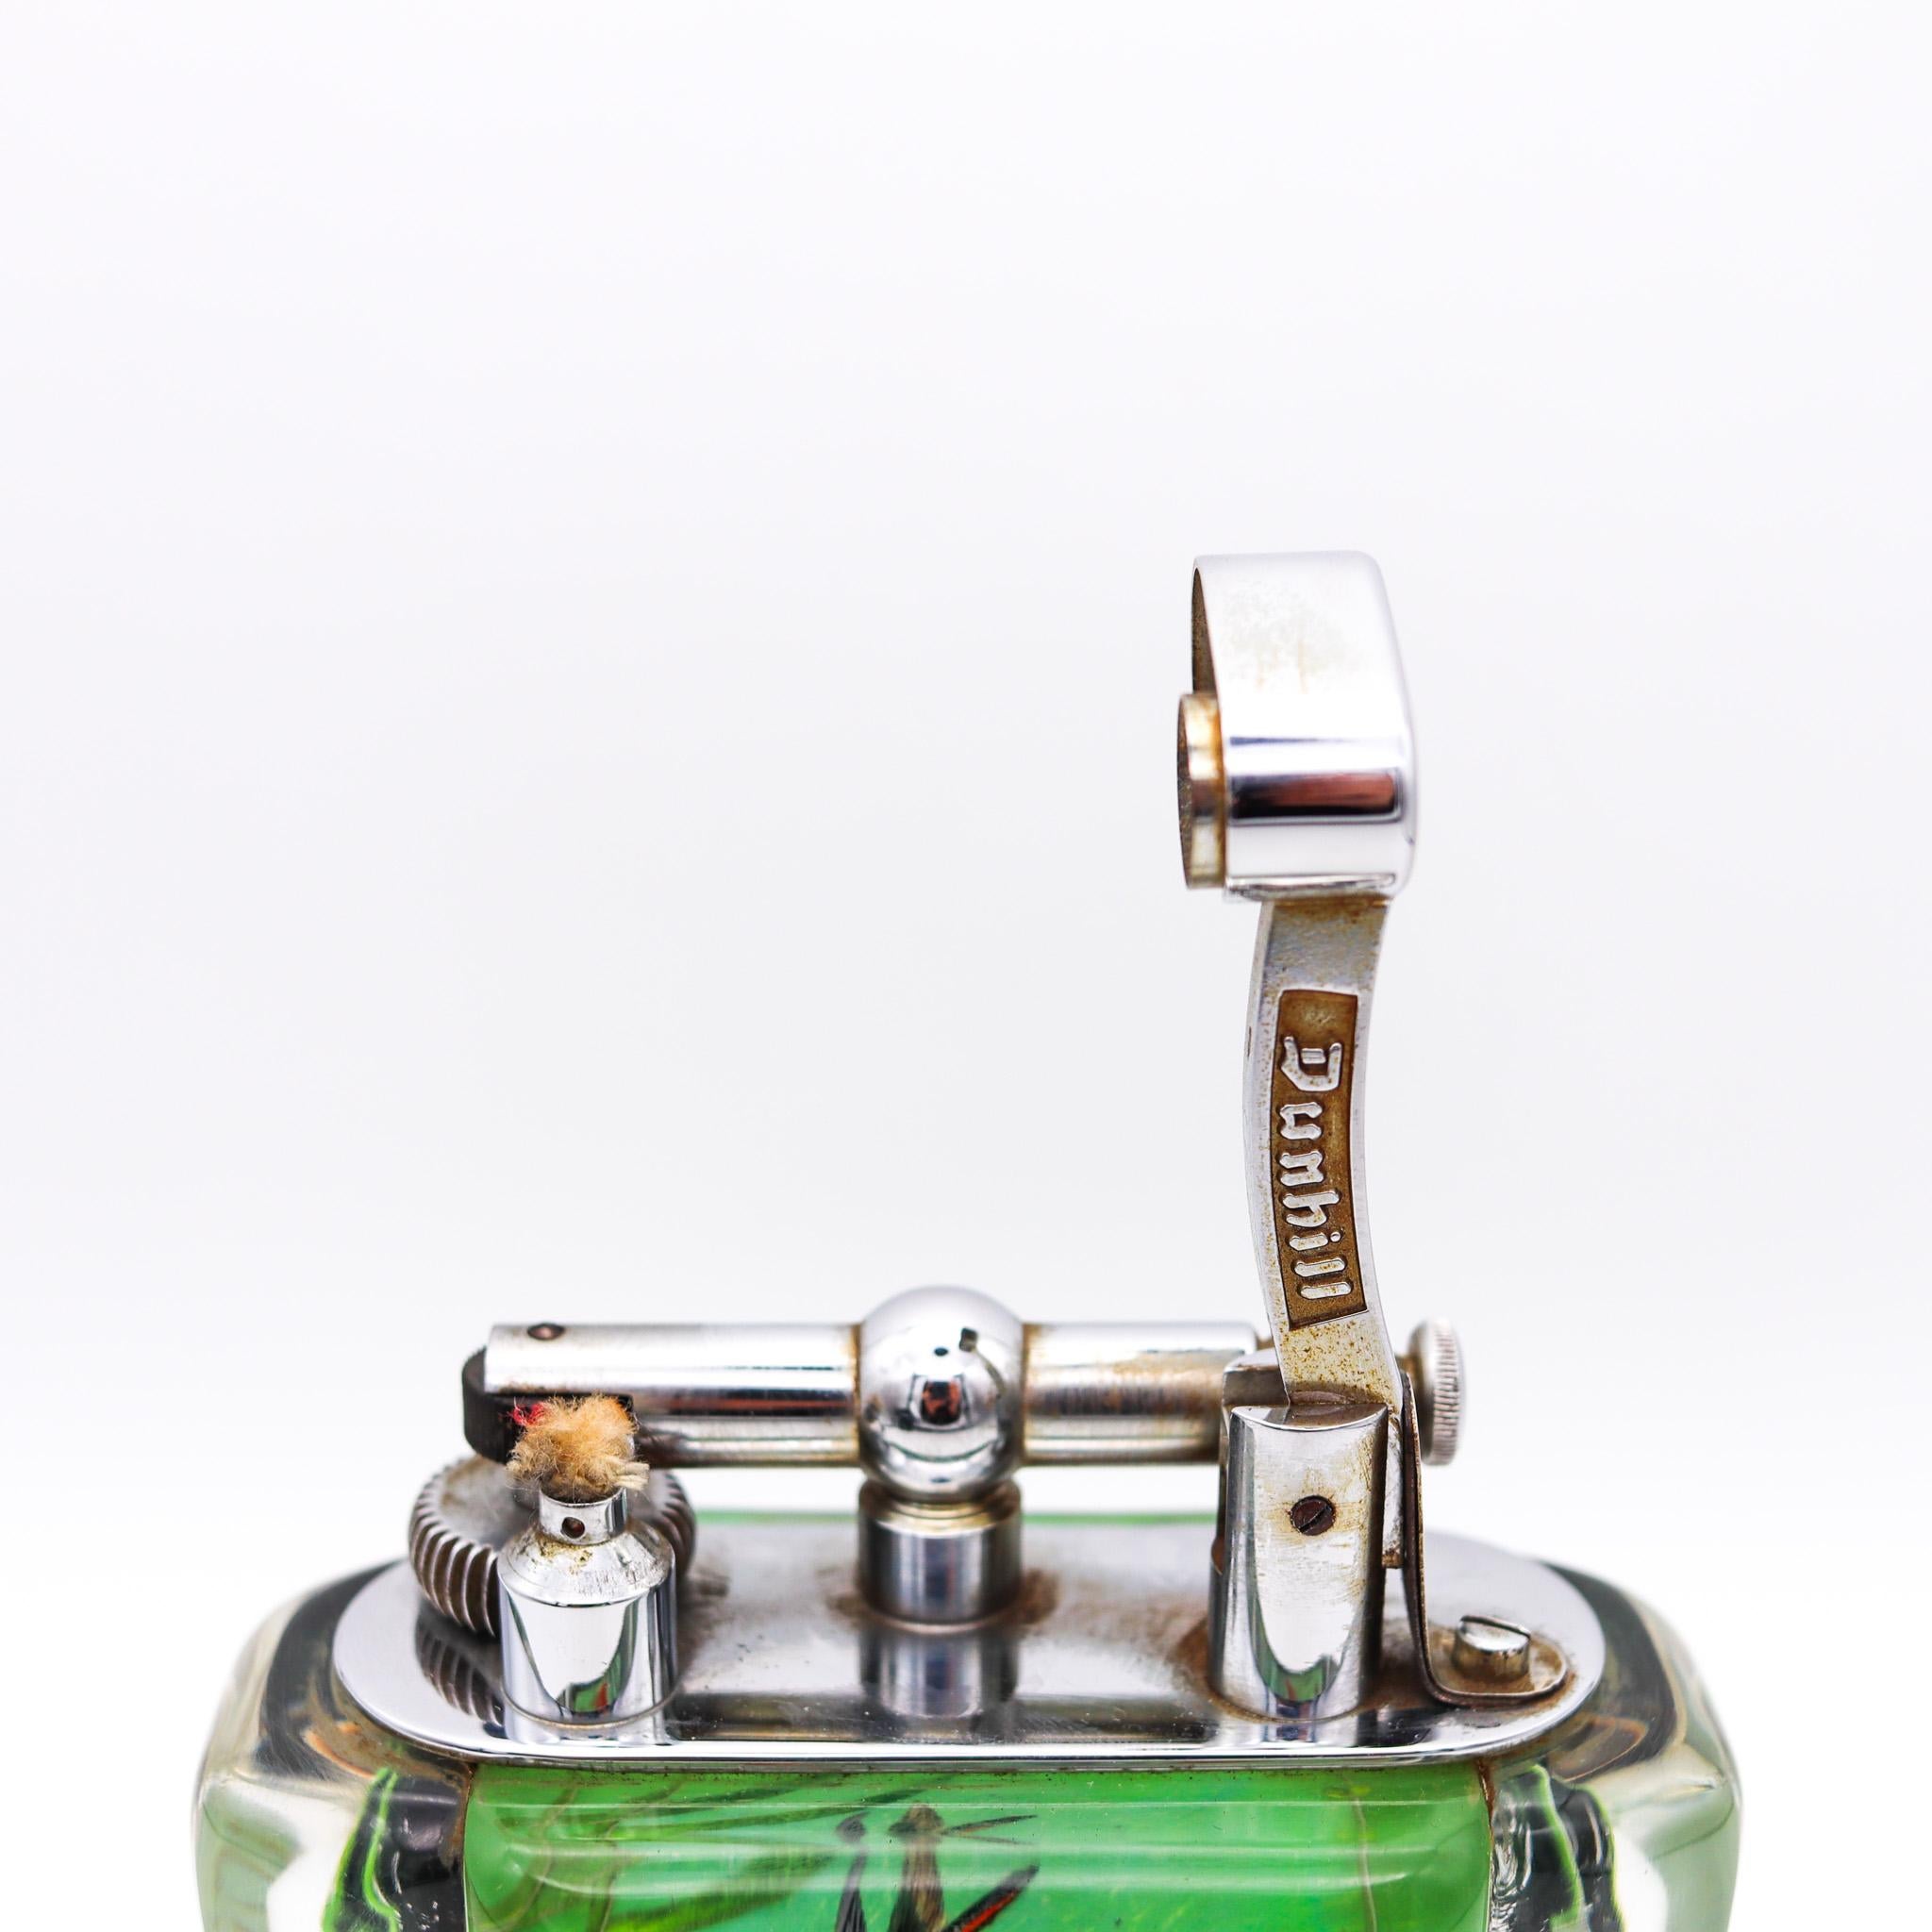 Mid-Century Modern Alfred Dunhill 1949 Standard Aquarium Lift Arm Petrol Lighter In Perspex Lucite  For Sale